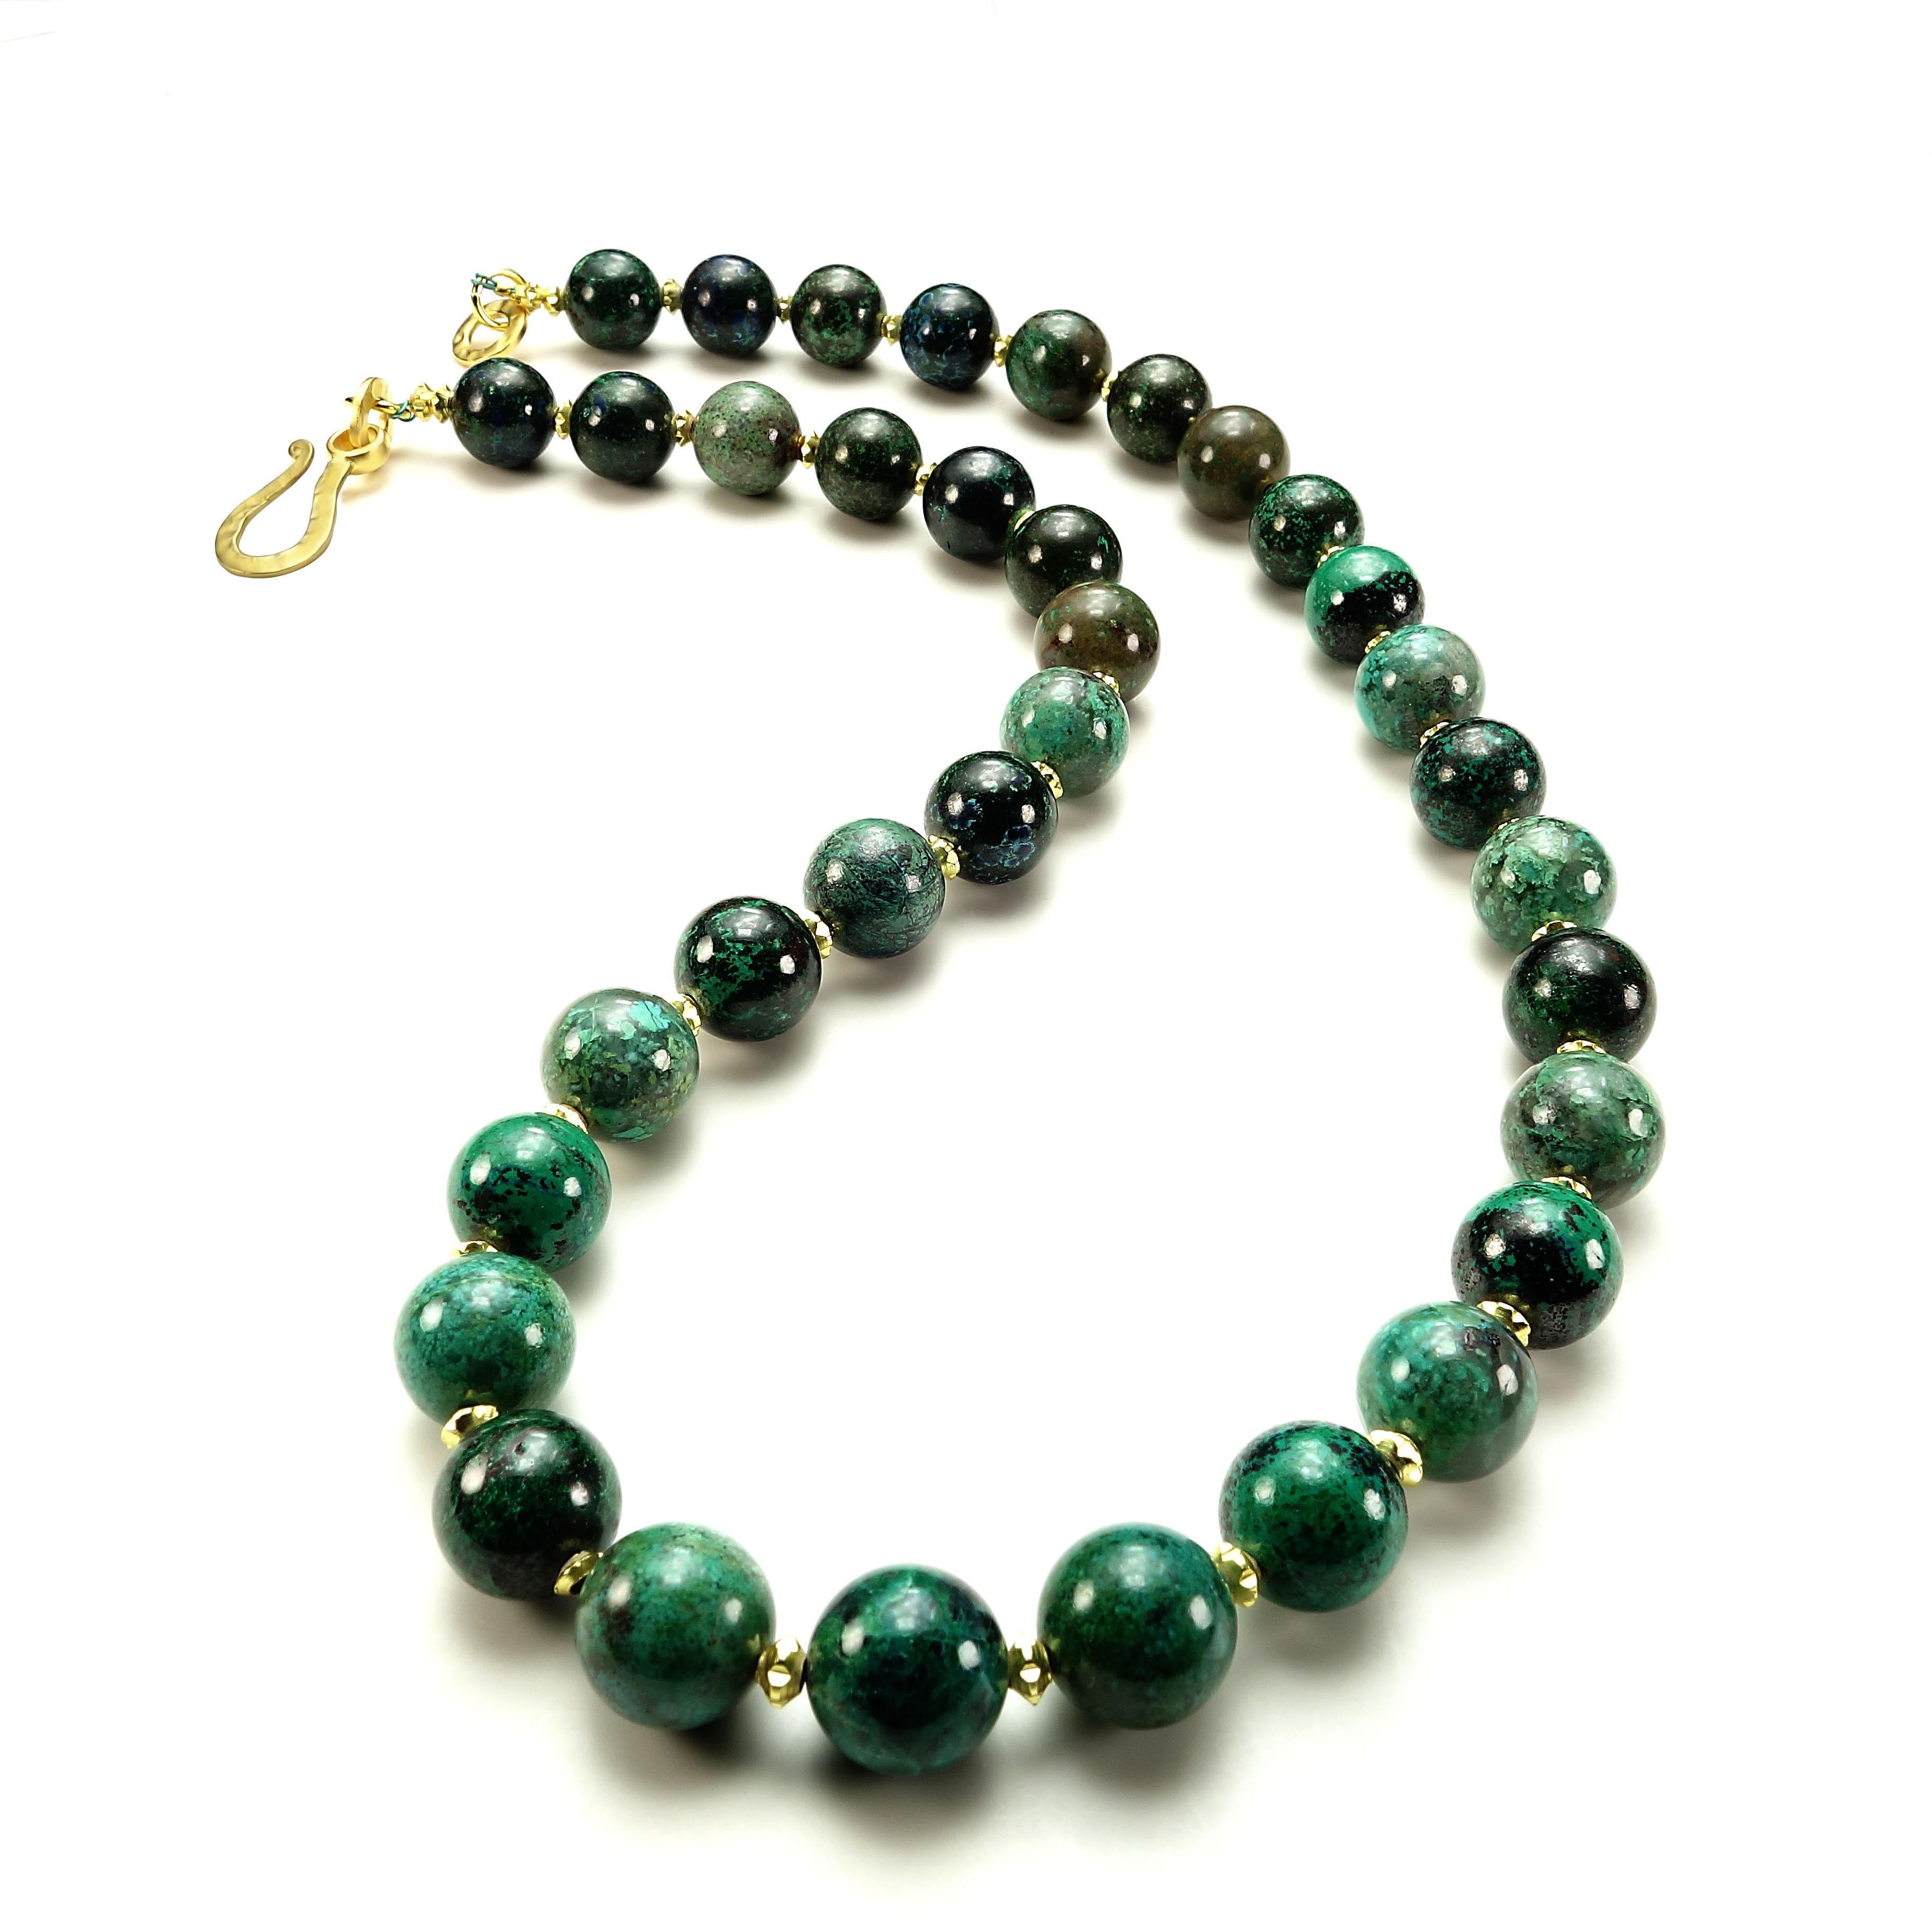 12MM Round Beautifully colored Congolese Chrysocolla enhanced with gold tone fluted accents. This necklace is 22 inches in length and secured by a hammered 18K yellow  vermeil hook and eye clasp.  